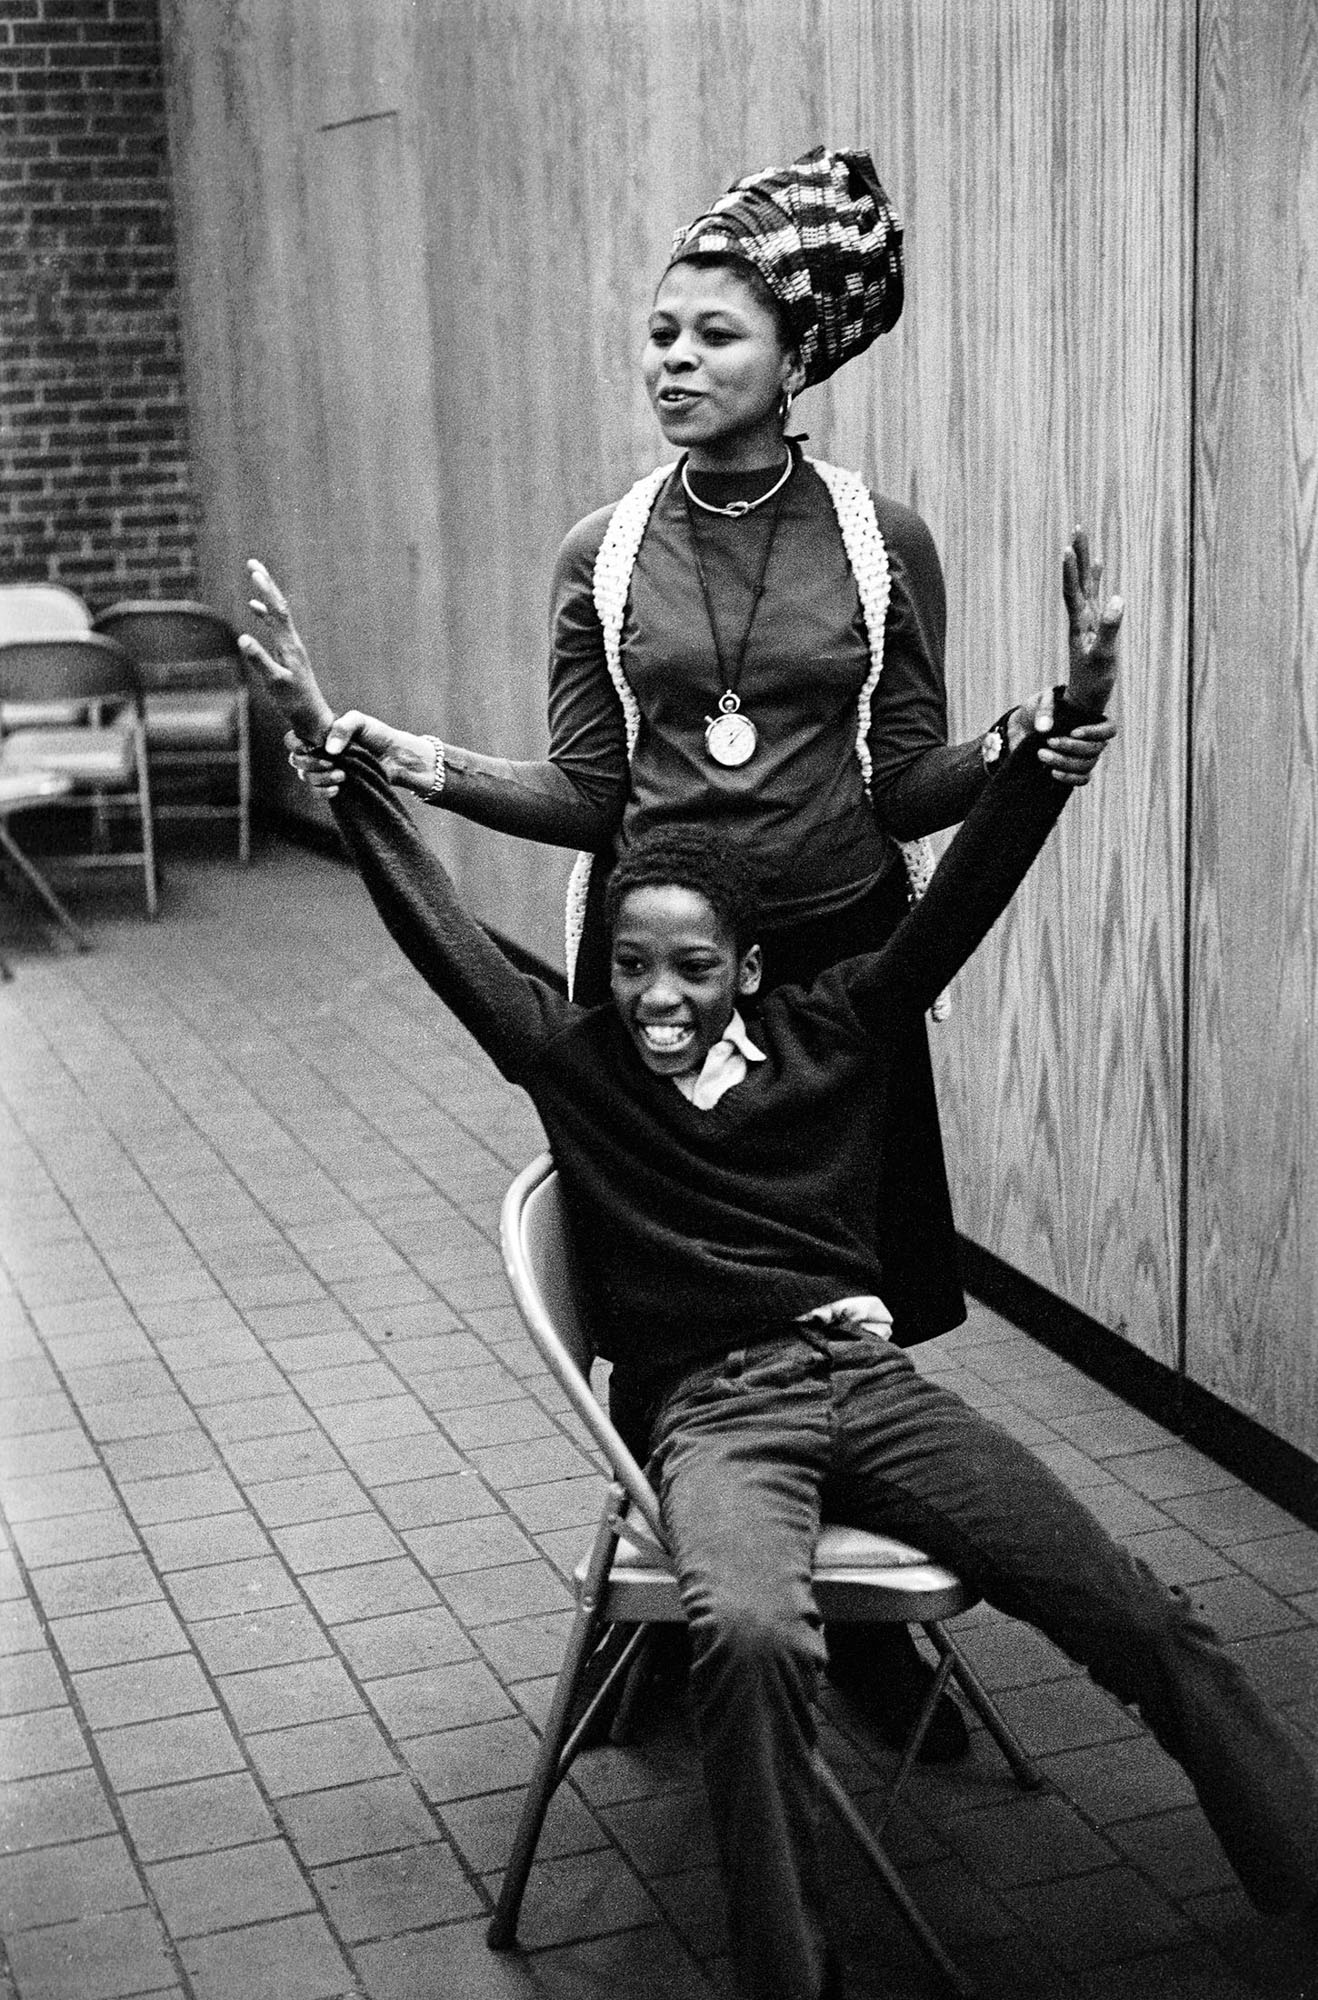 1971 - New York, New York: Black Panther Party after school program in Harlem.